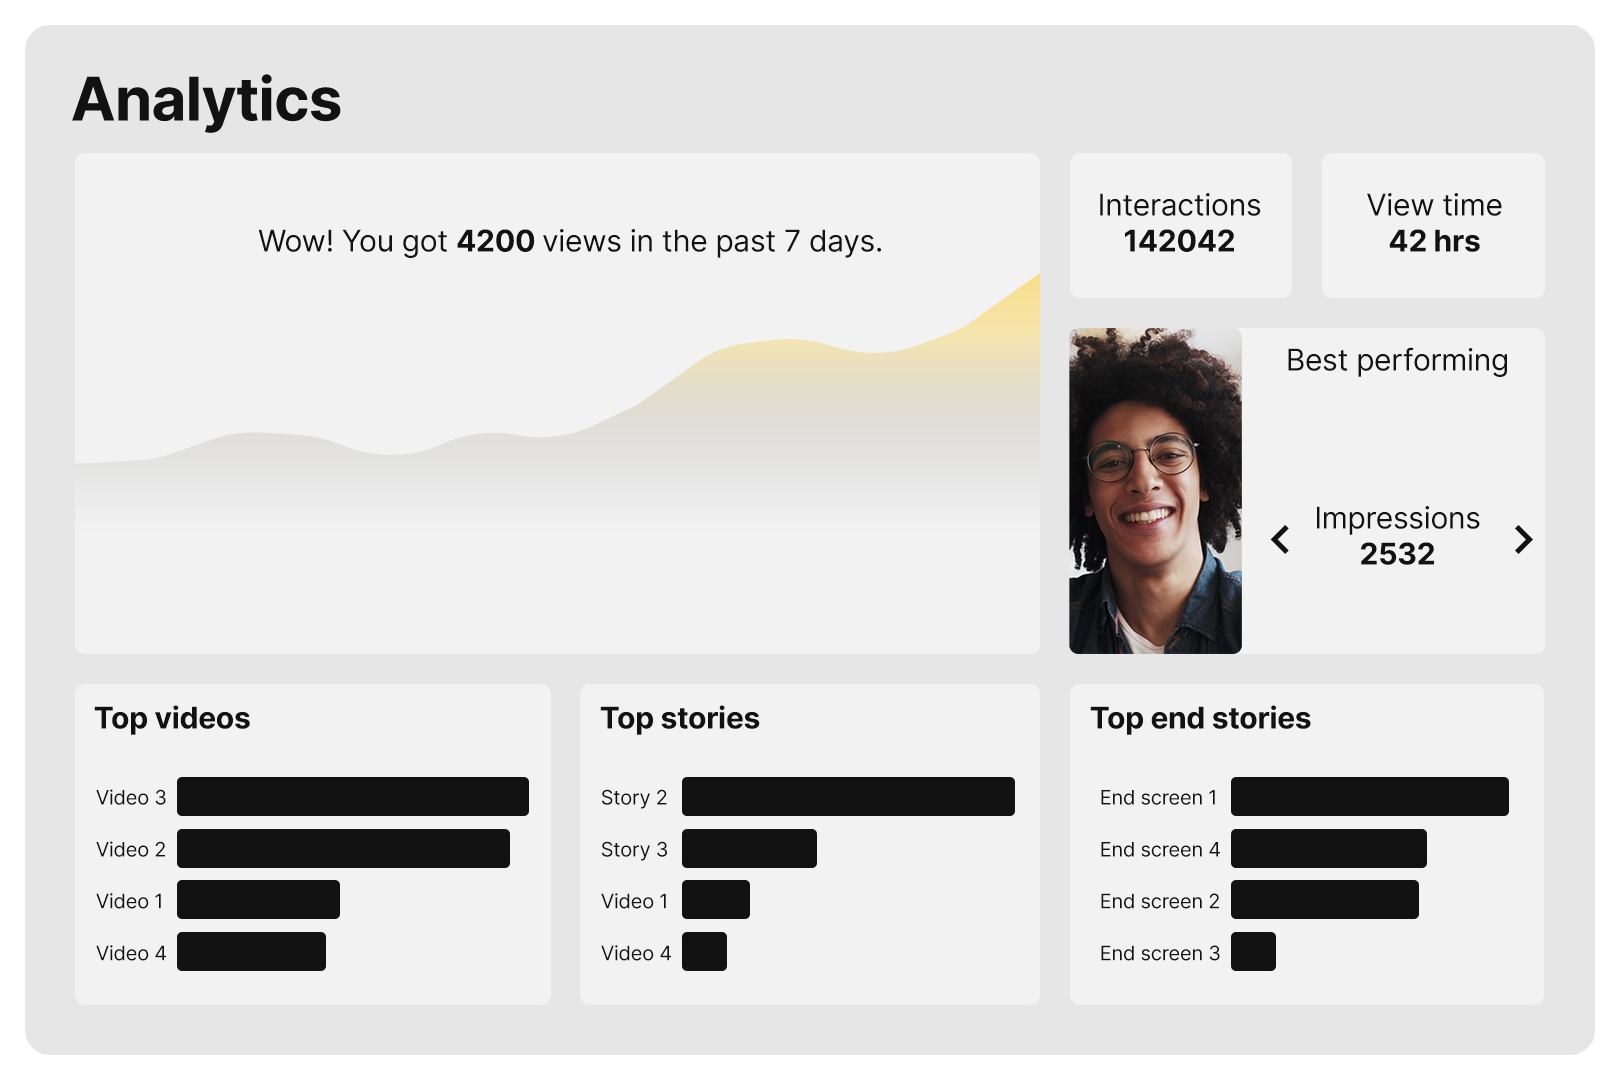 analytics view where you can see how your videos perform